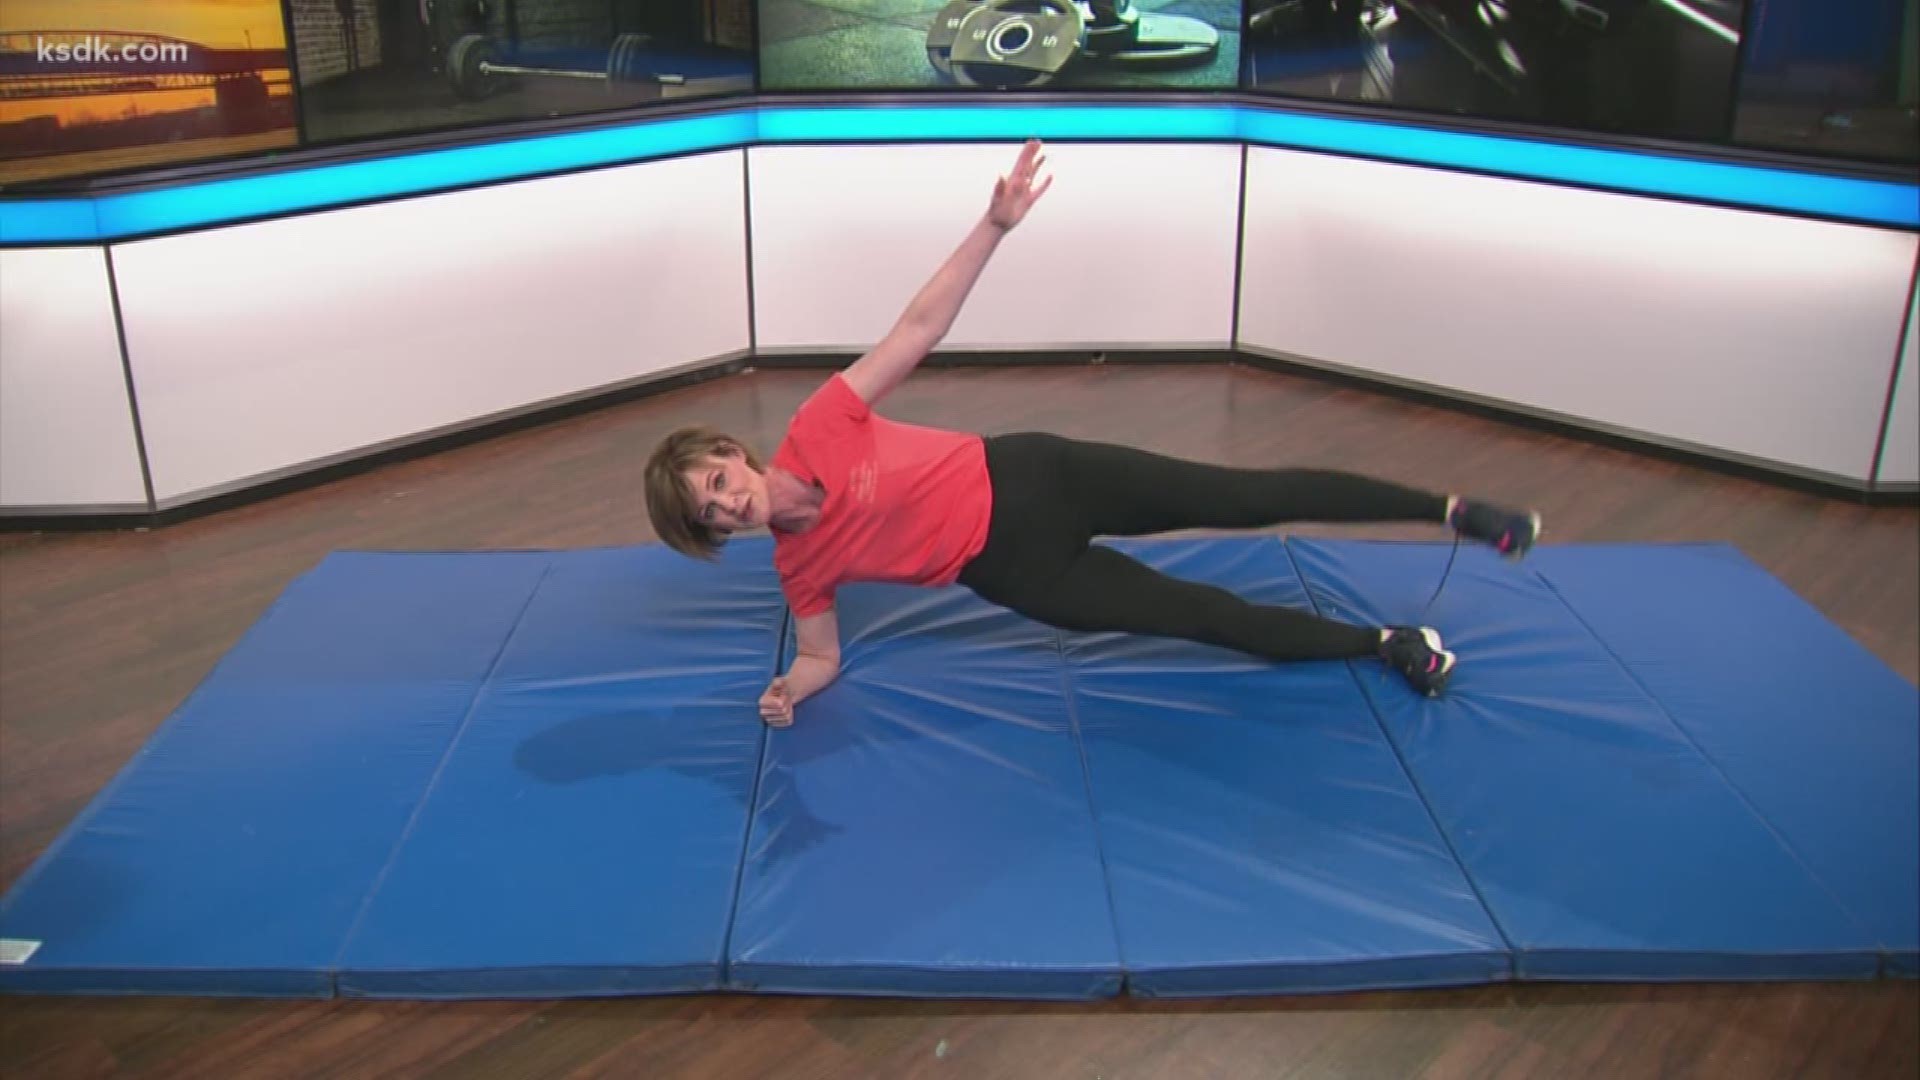 5 On Your Side's Monica Adams shows everyone how to keep up with their workouts from home.